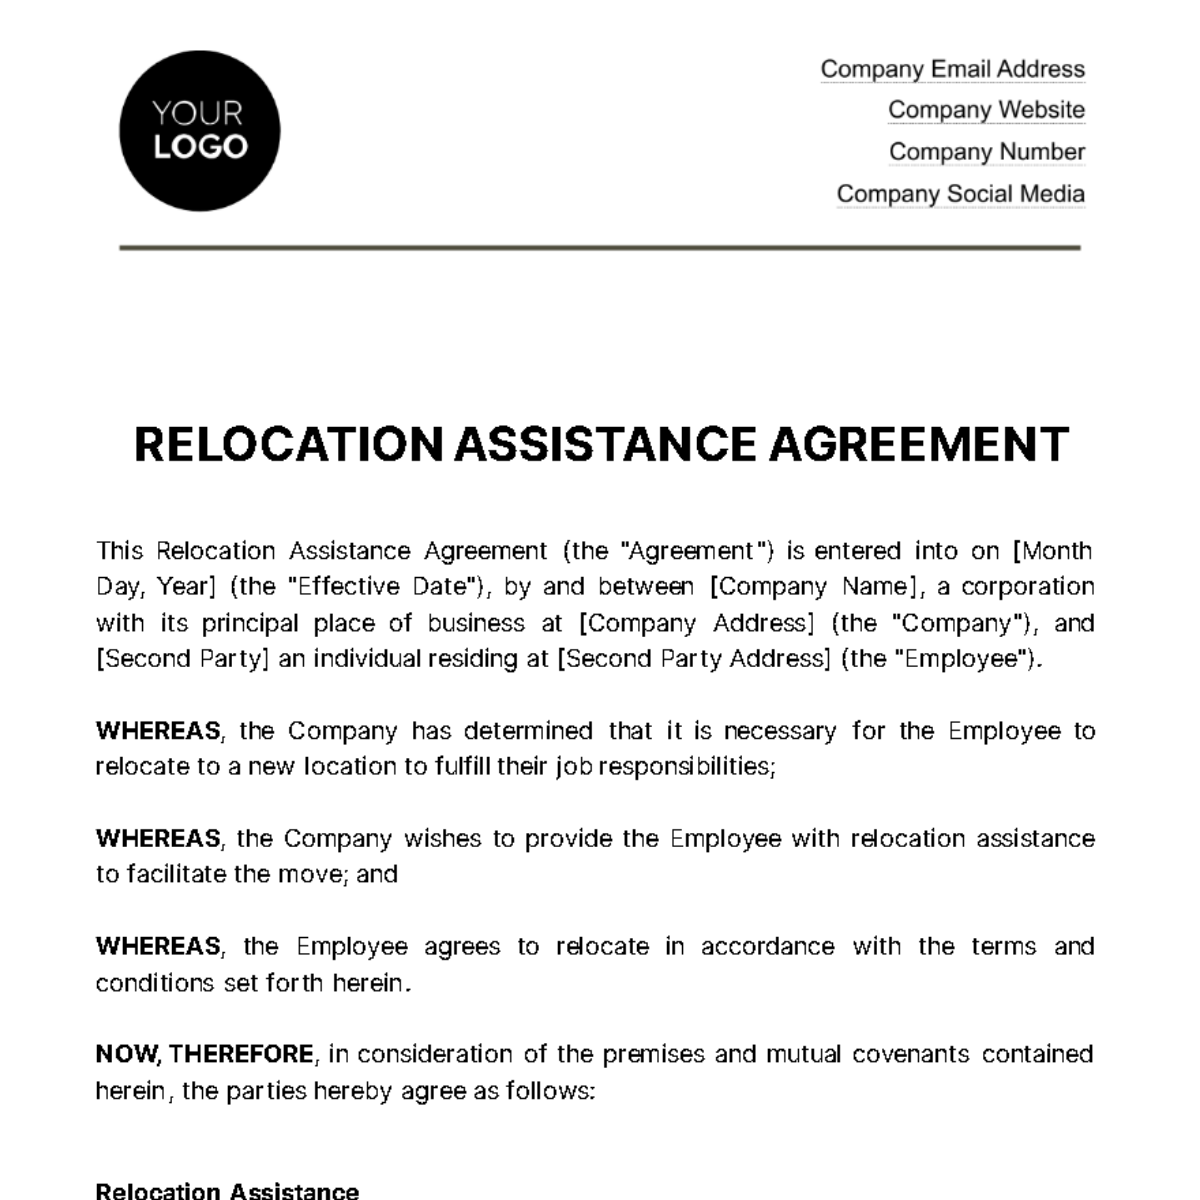 Relocation Assistance Agreement HR Template